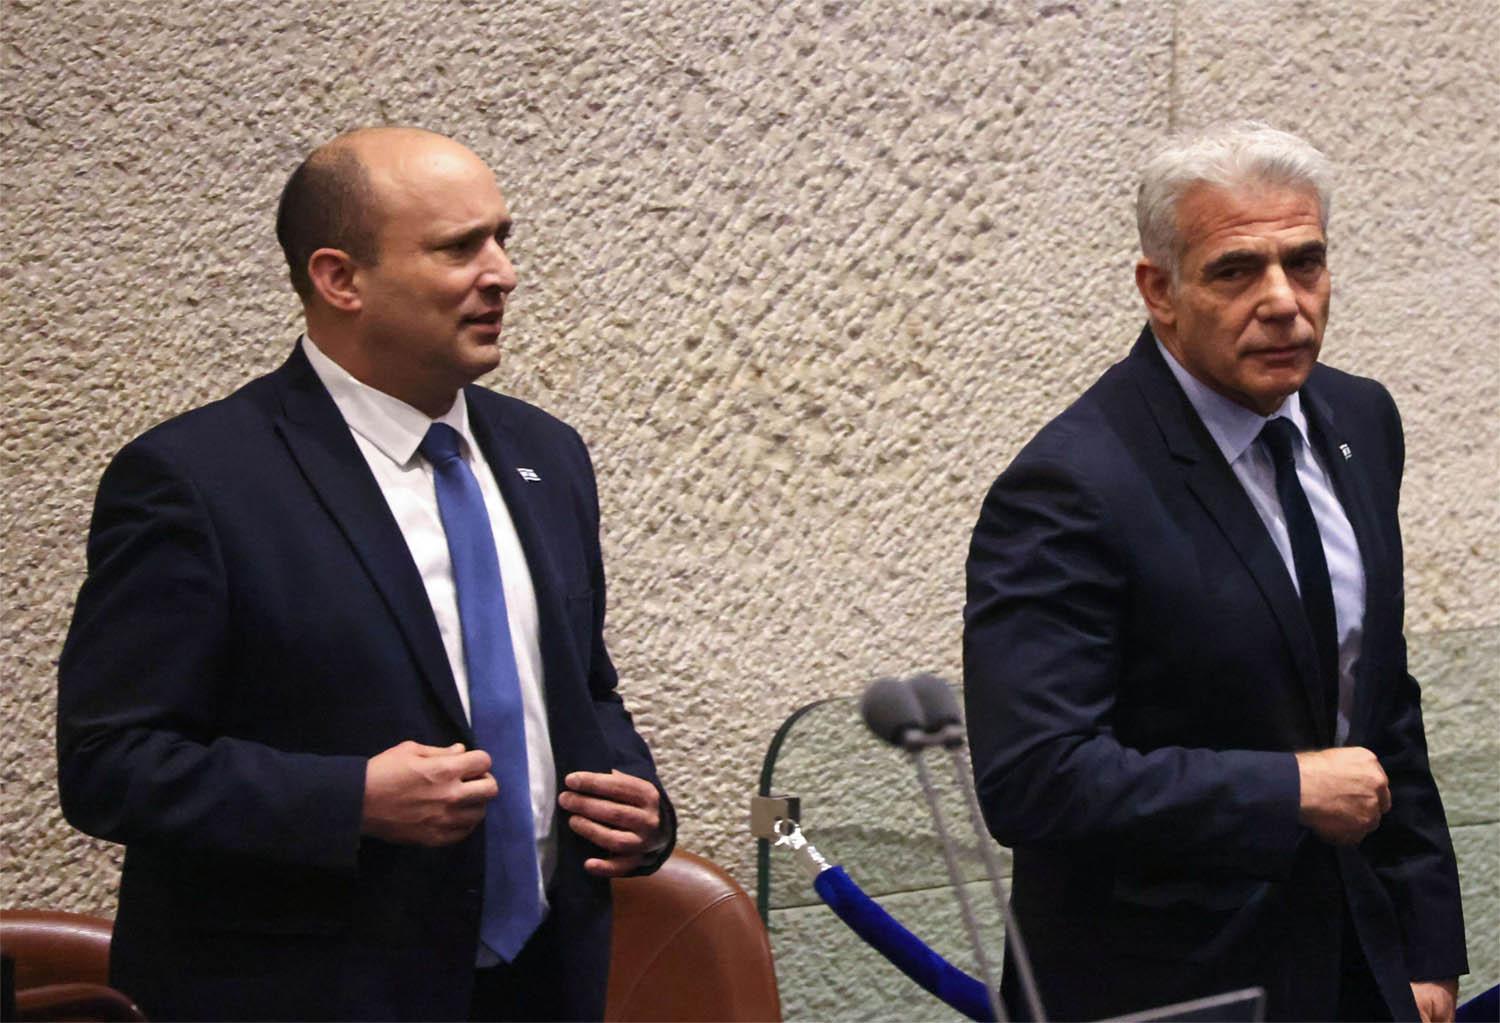 Lapid and Bennett ended Netanyahu's record reign a year ago by forming a rare alliance of rightists